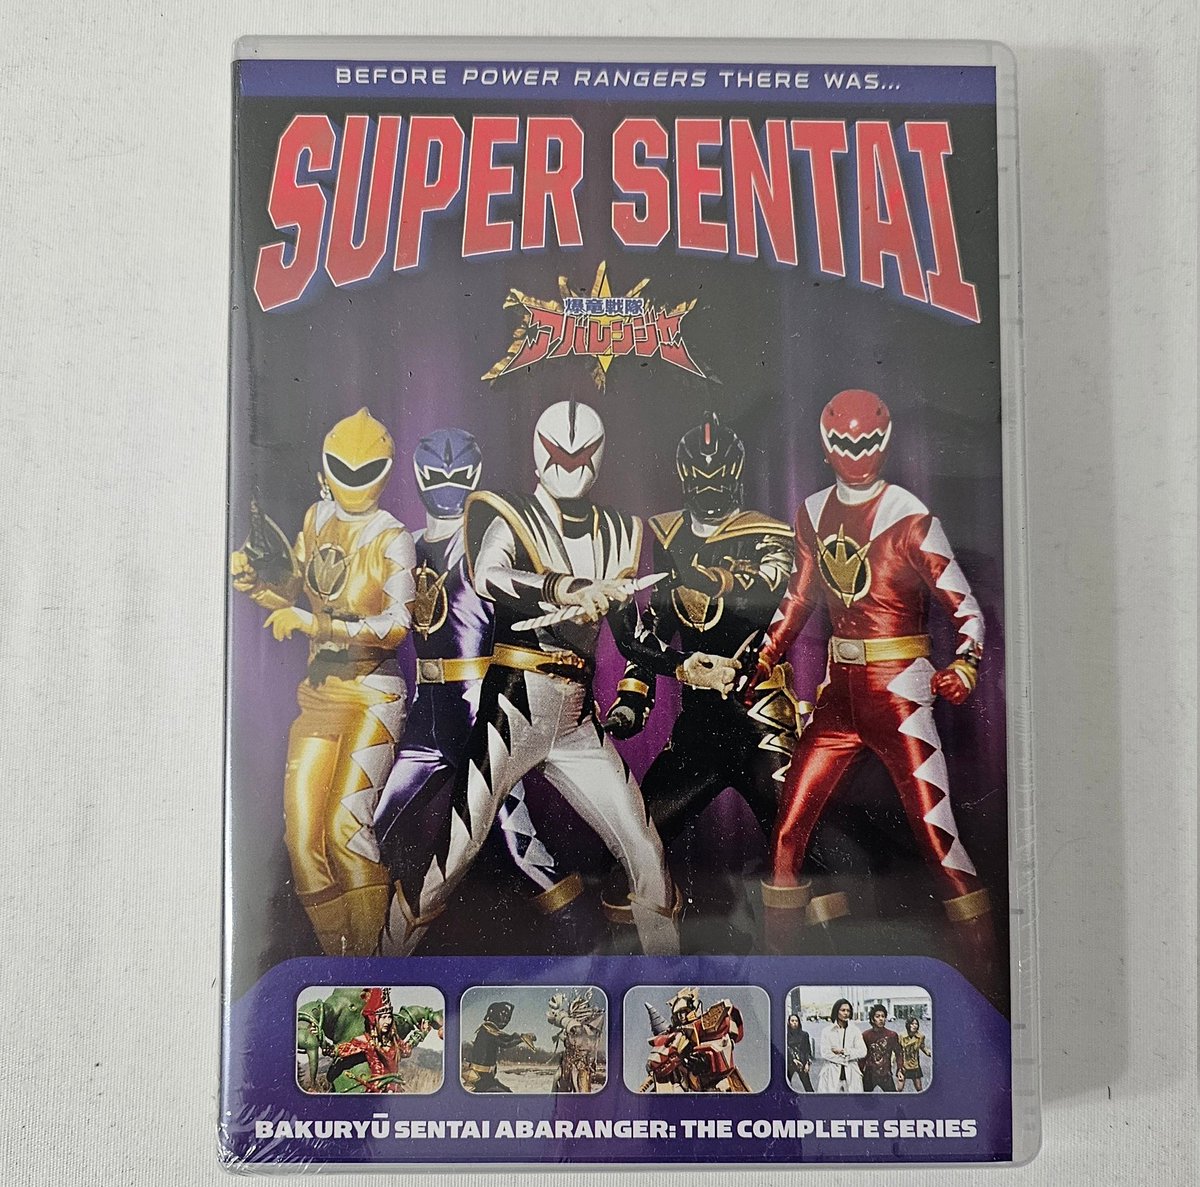 ⚡ Giveaway! ⚡ Repost + Like + Follow to win Abaranger: The Complete Series on DVD! Adapted into #PowerRangers Dino Thunder! Fans outside US can enter, but must pay shipping! #SuperSentai DVDs are available on Amazon!